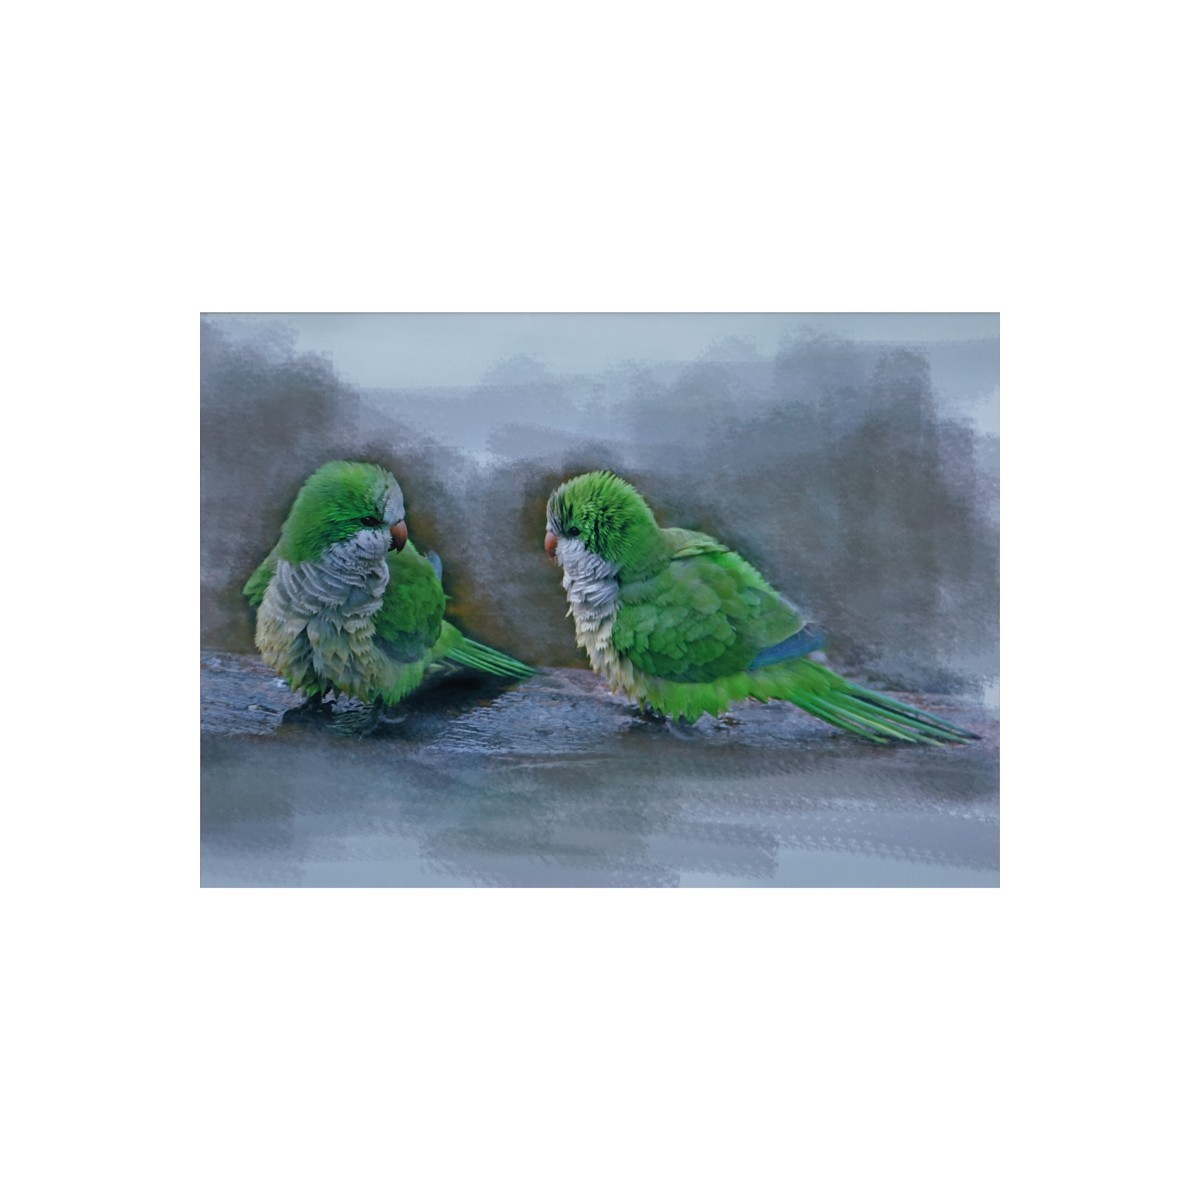 Alice Greko (20th C.) Photo and Digital Paintbrush "Florida Parrots" Signed and Numbered 3/40 in Pencil. Good condition.